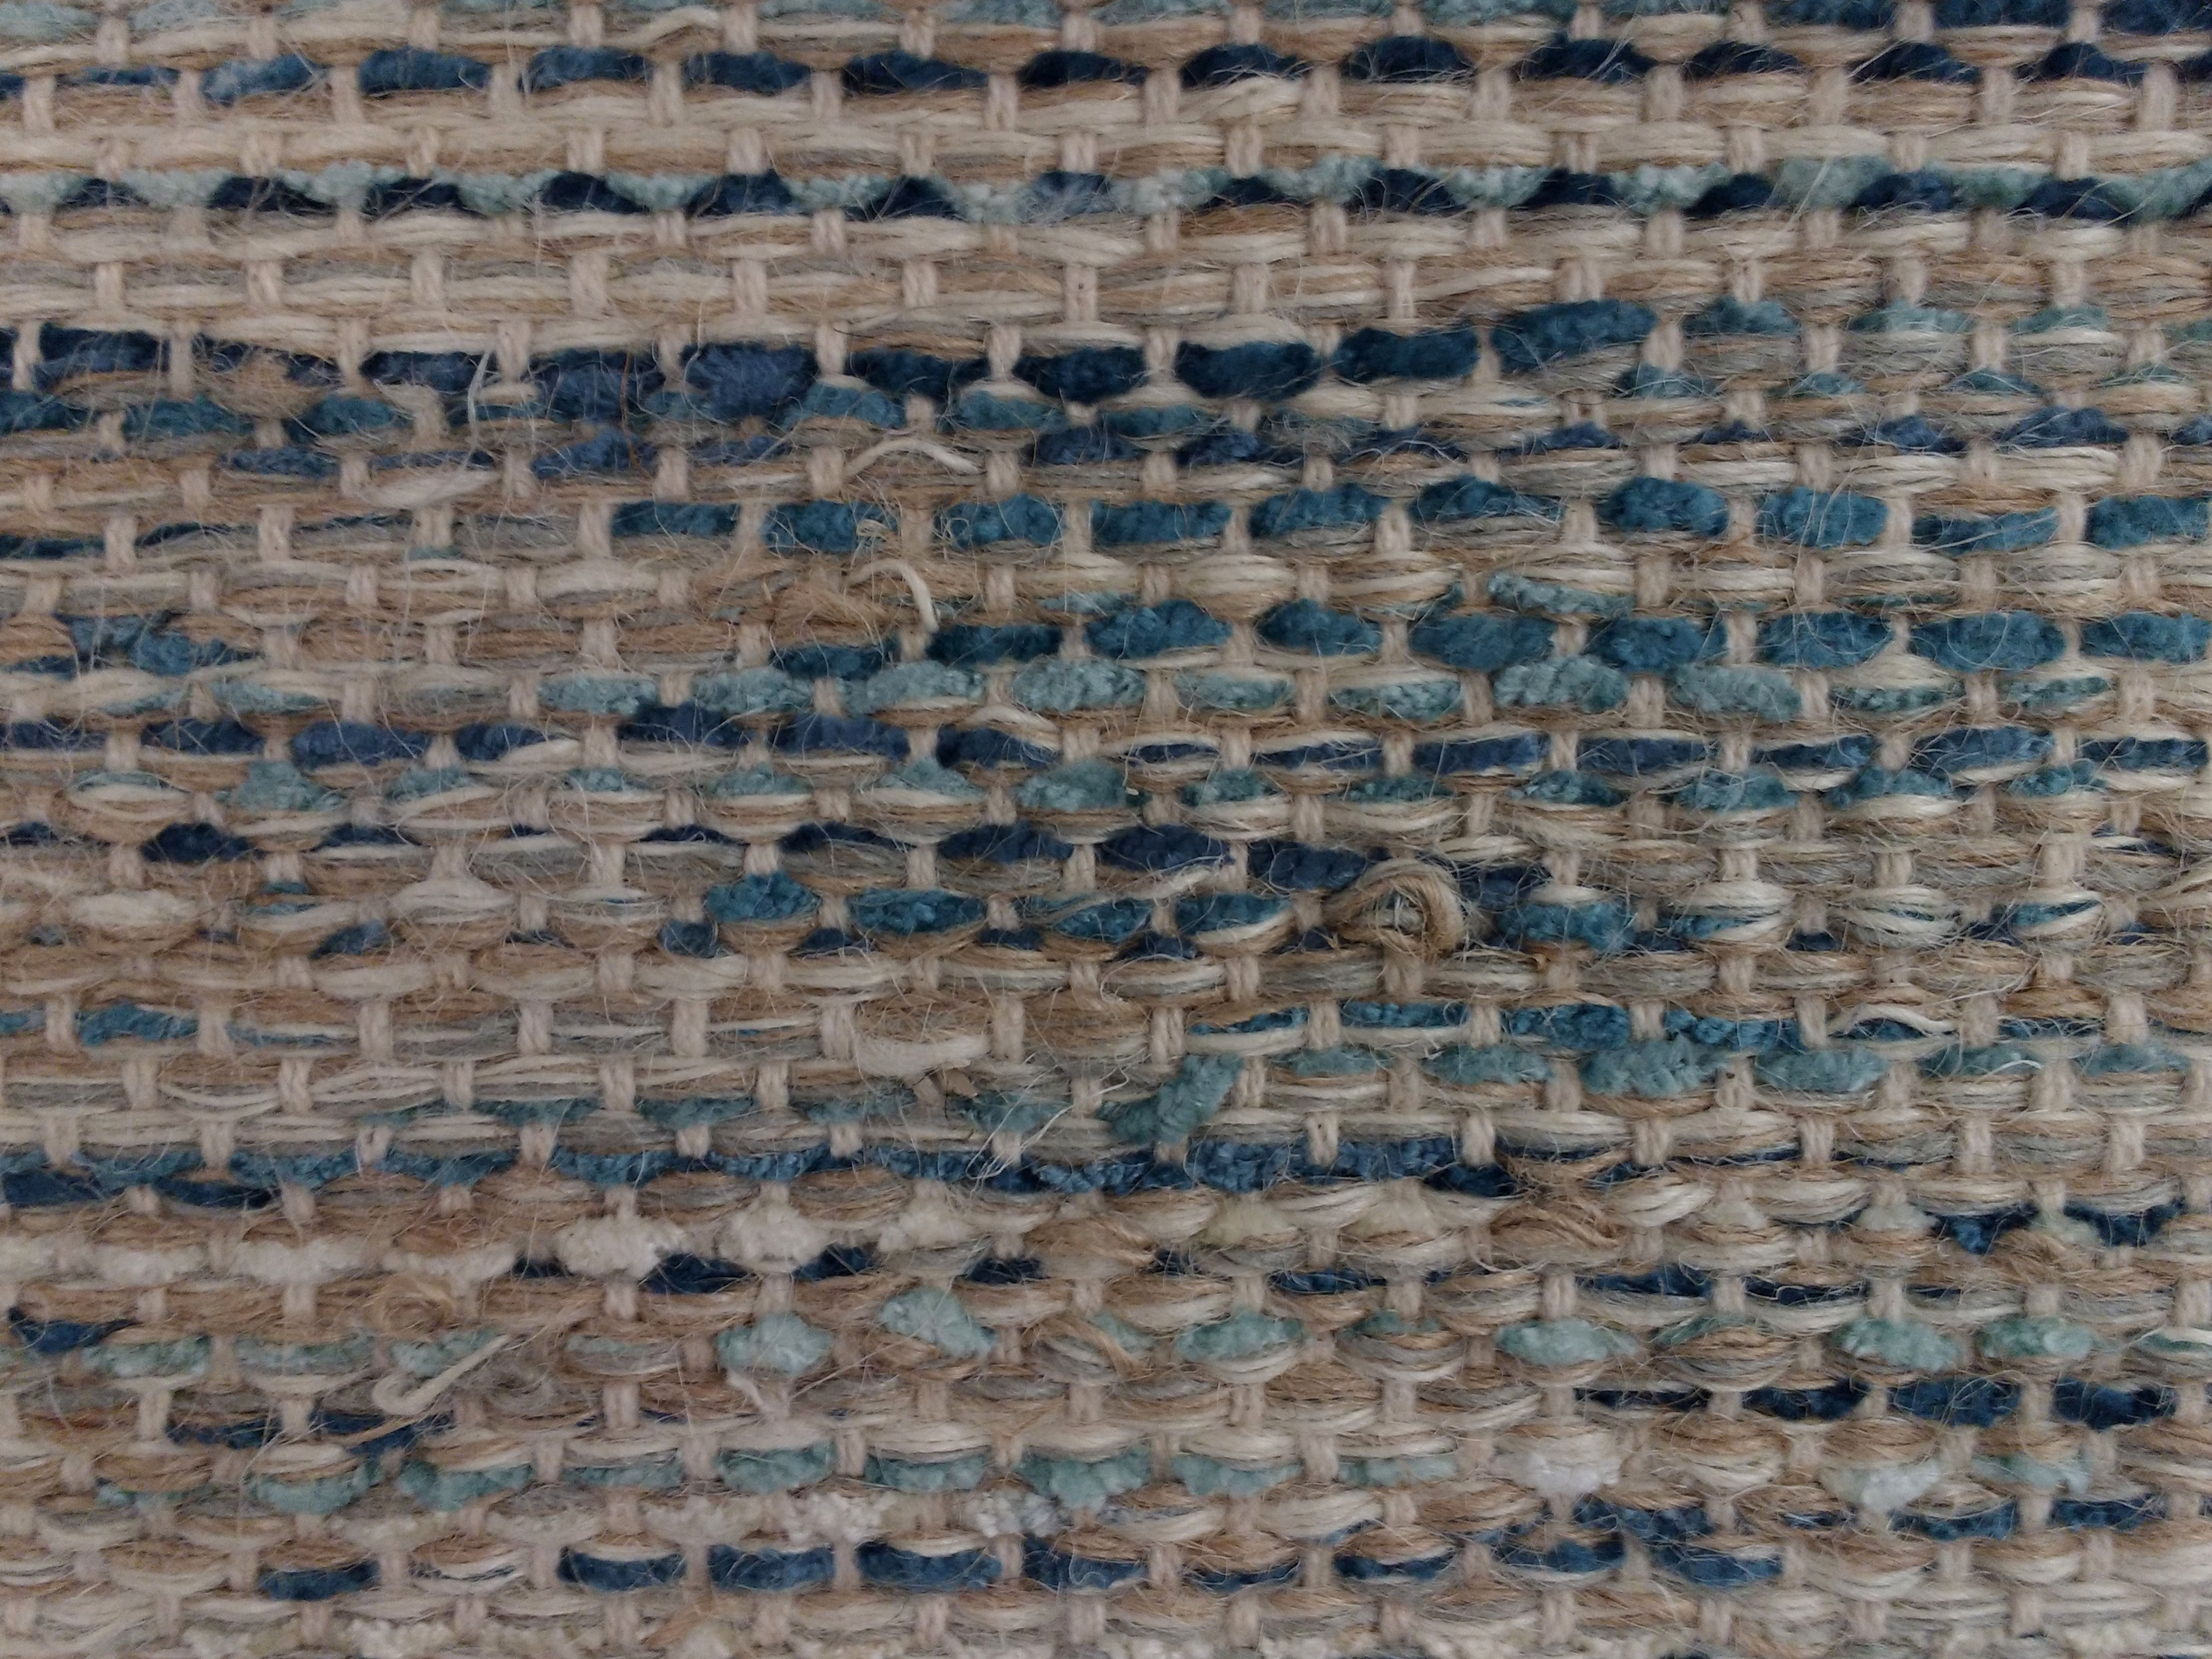 Brown and Blue Woven Rug Texture Picture | Free Photograph | Photos ...